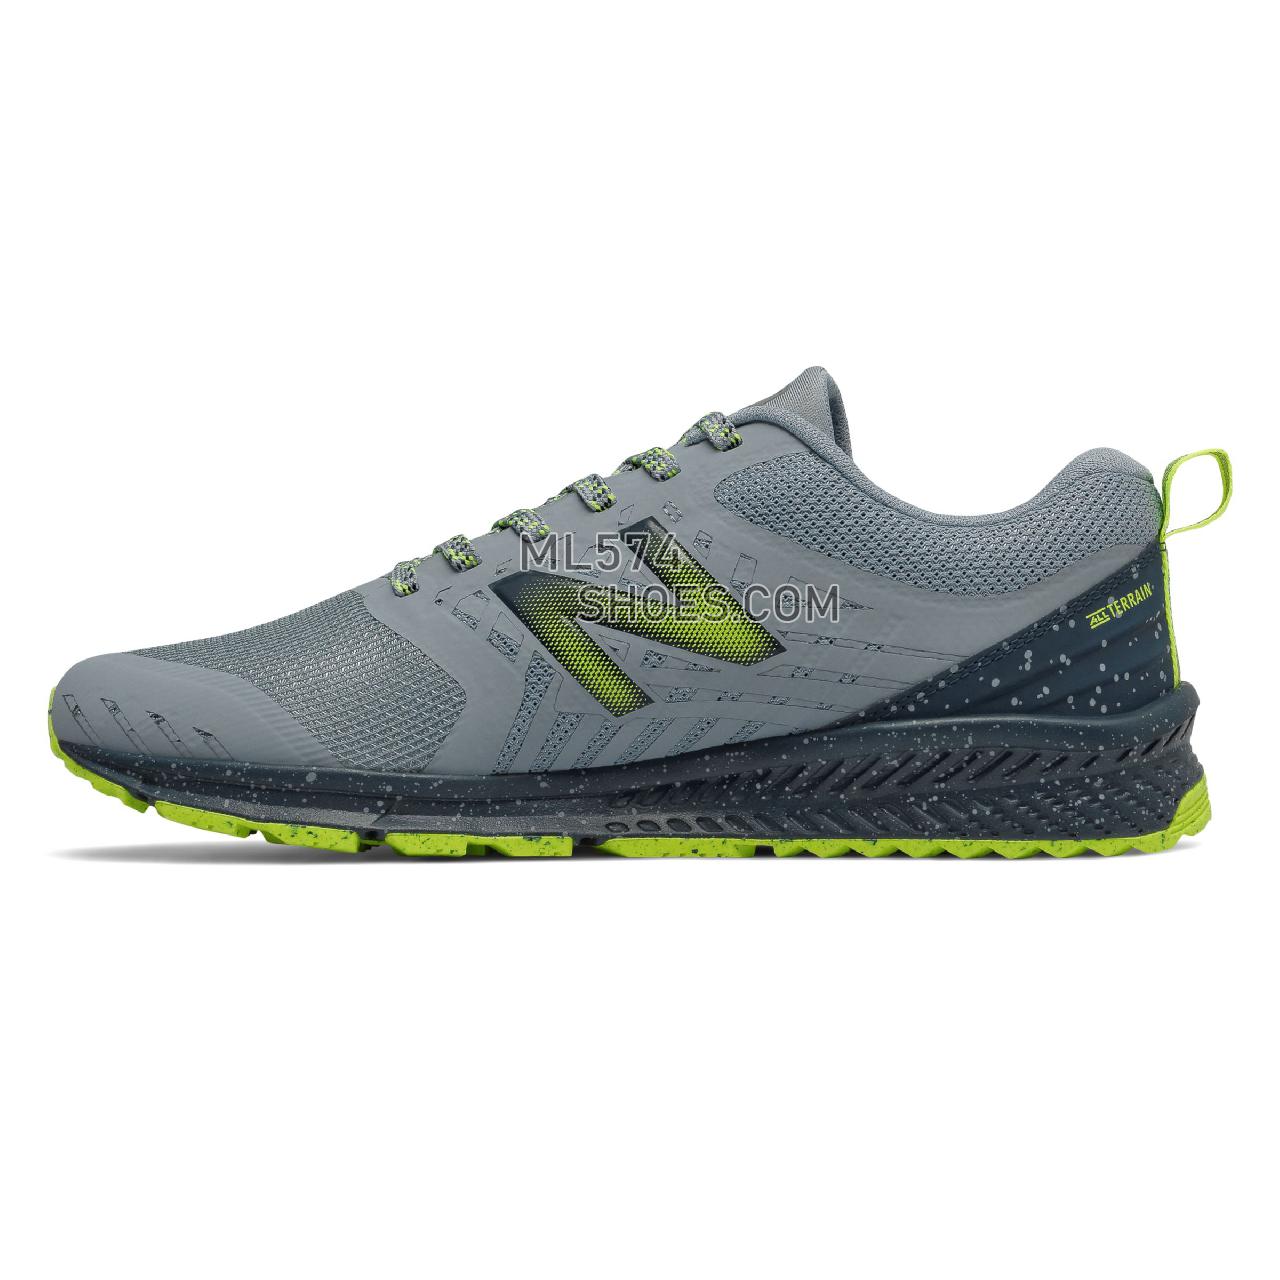 New Balance FuelCore NITREL Trail - Men's 1 - Running Reflection with Galaxy - MTNTRRR1